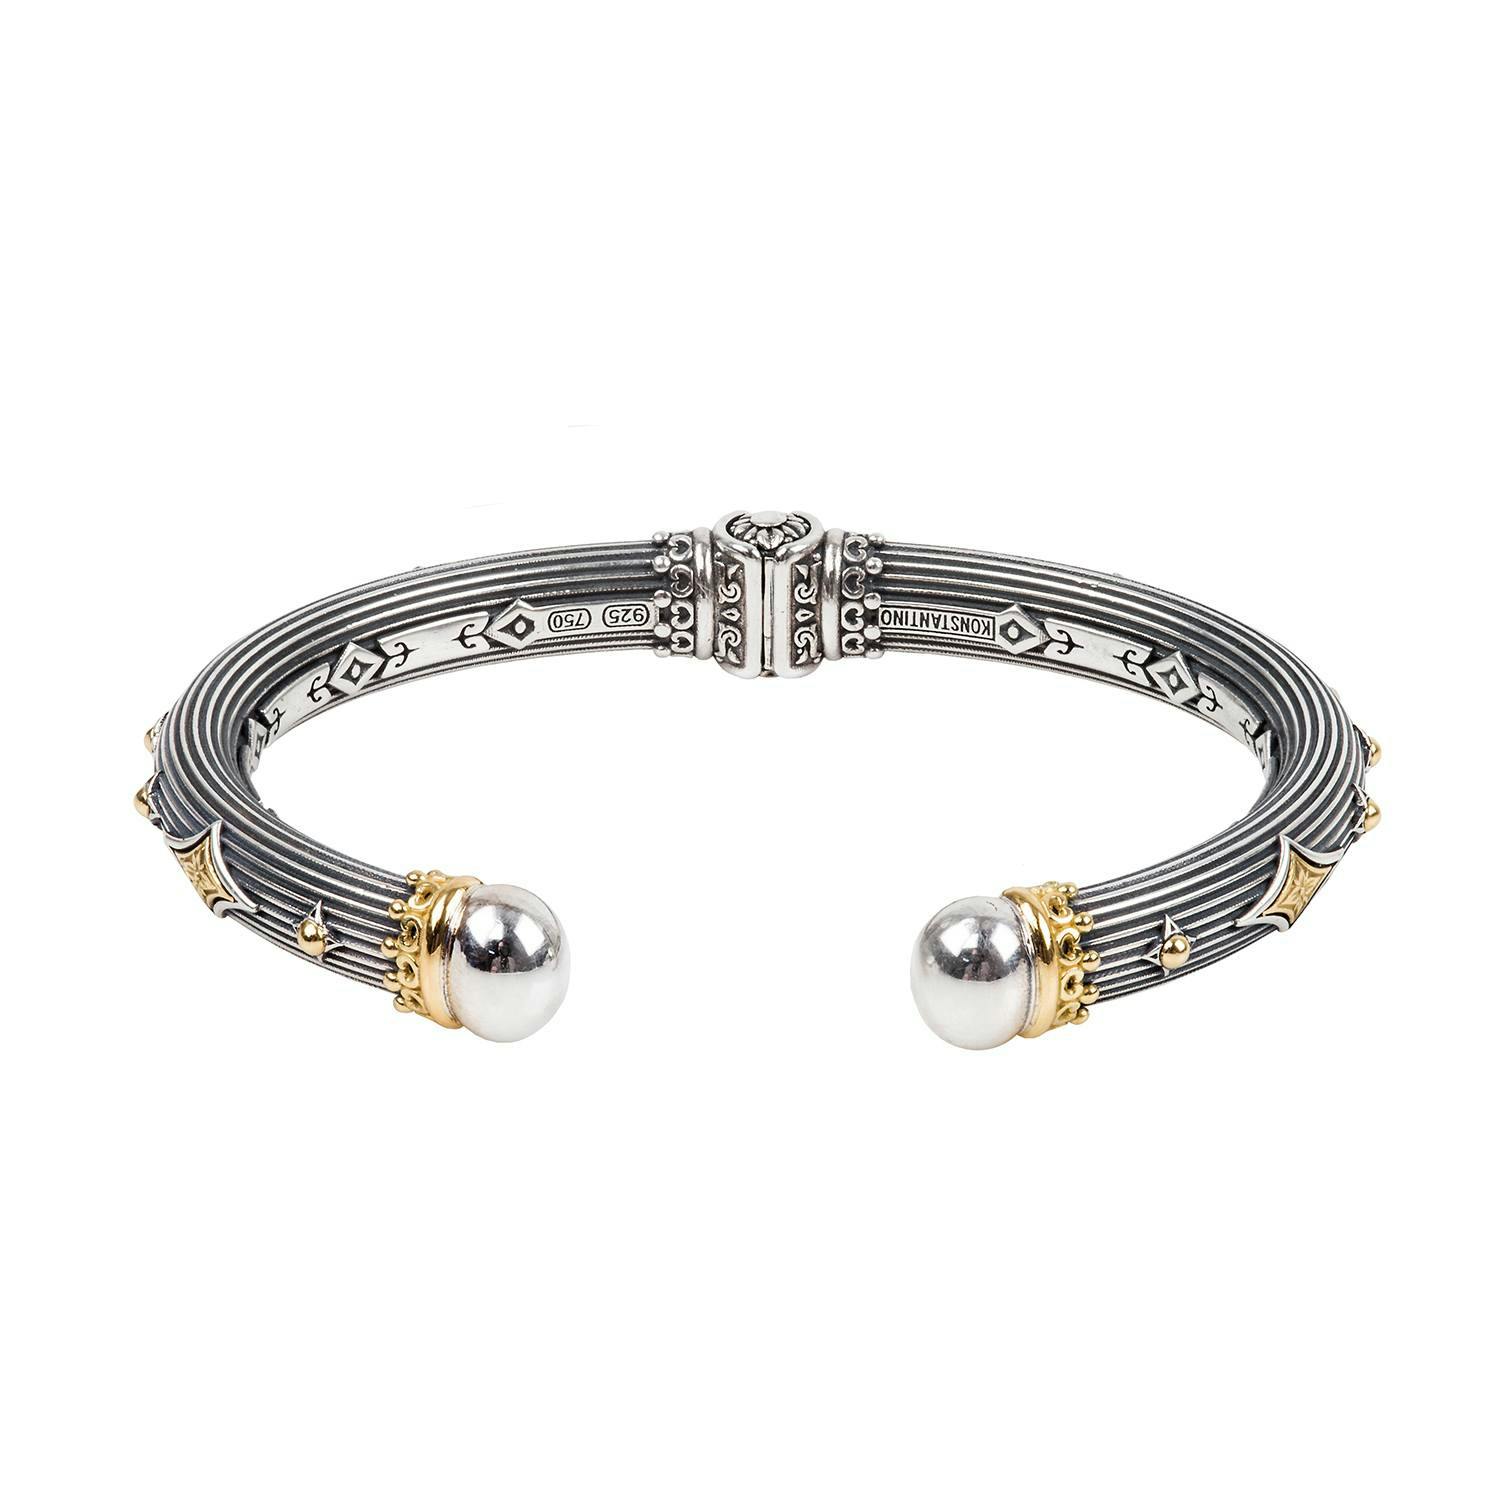 Konstantino Delos grooved open hinge bracelet with 18kt gold diamond accents_1